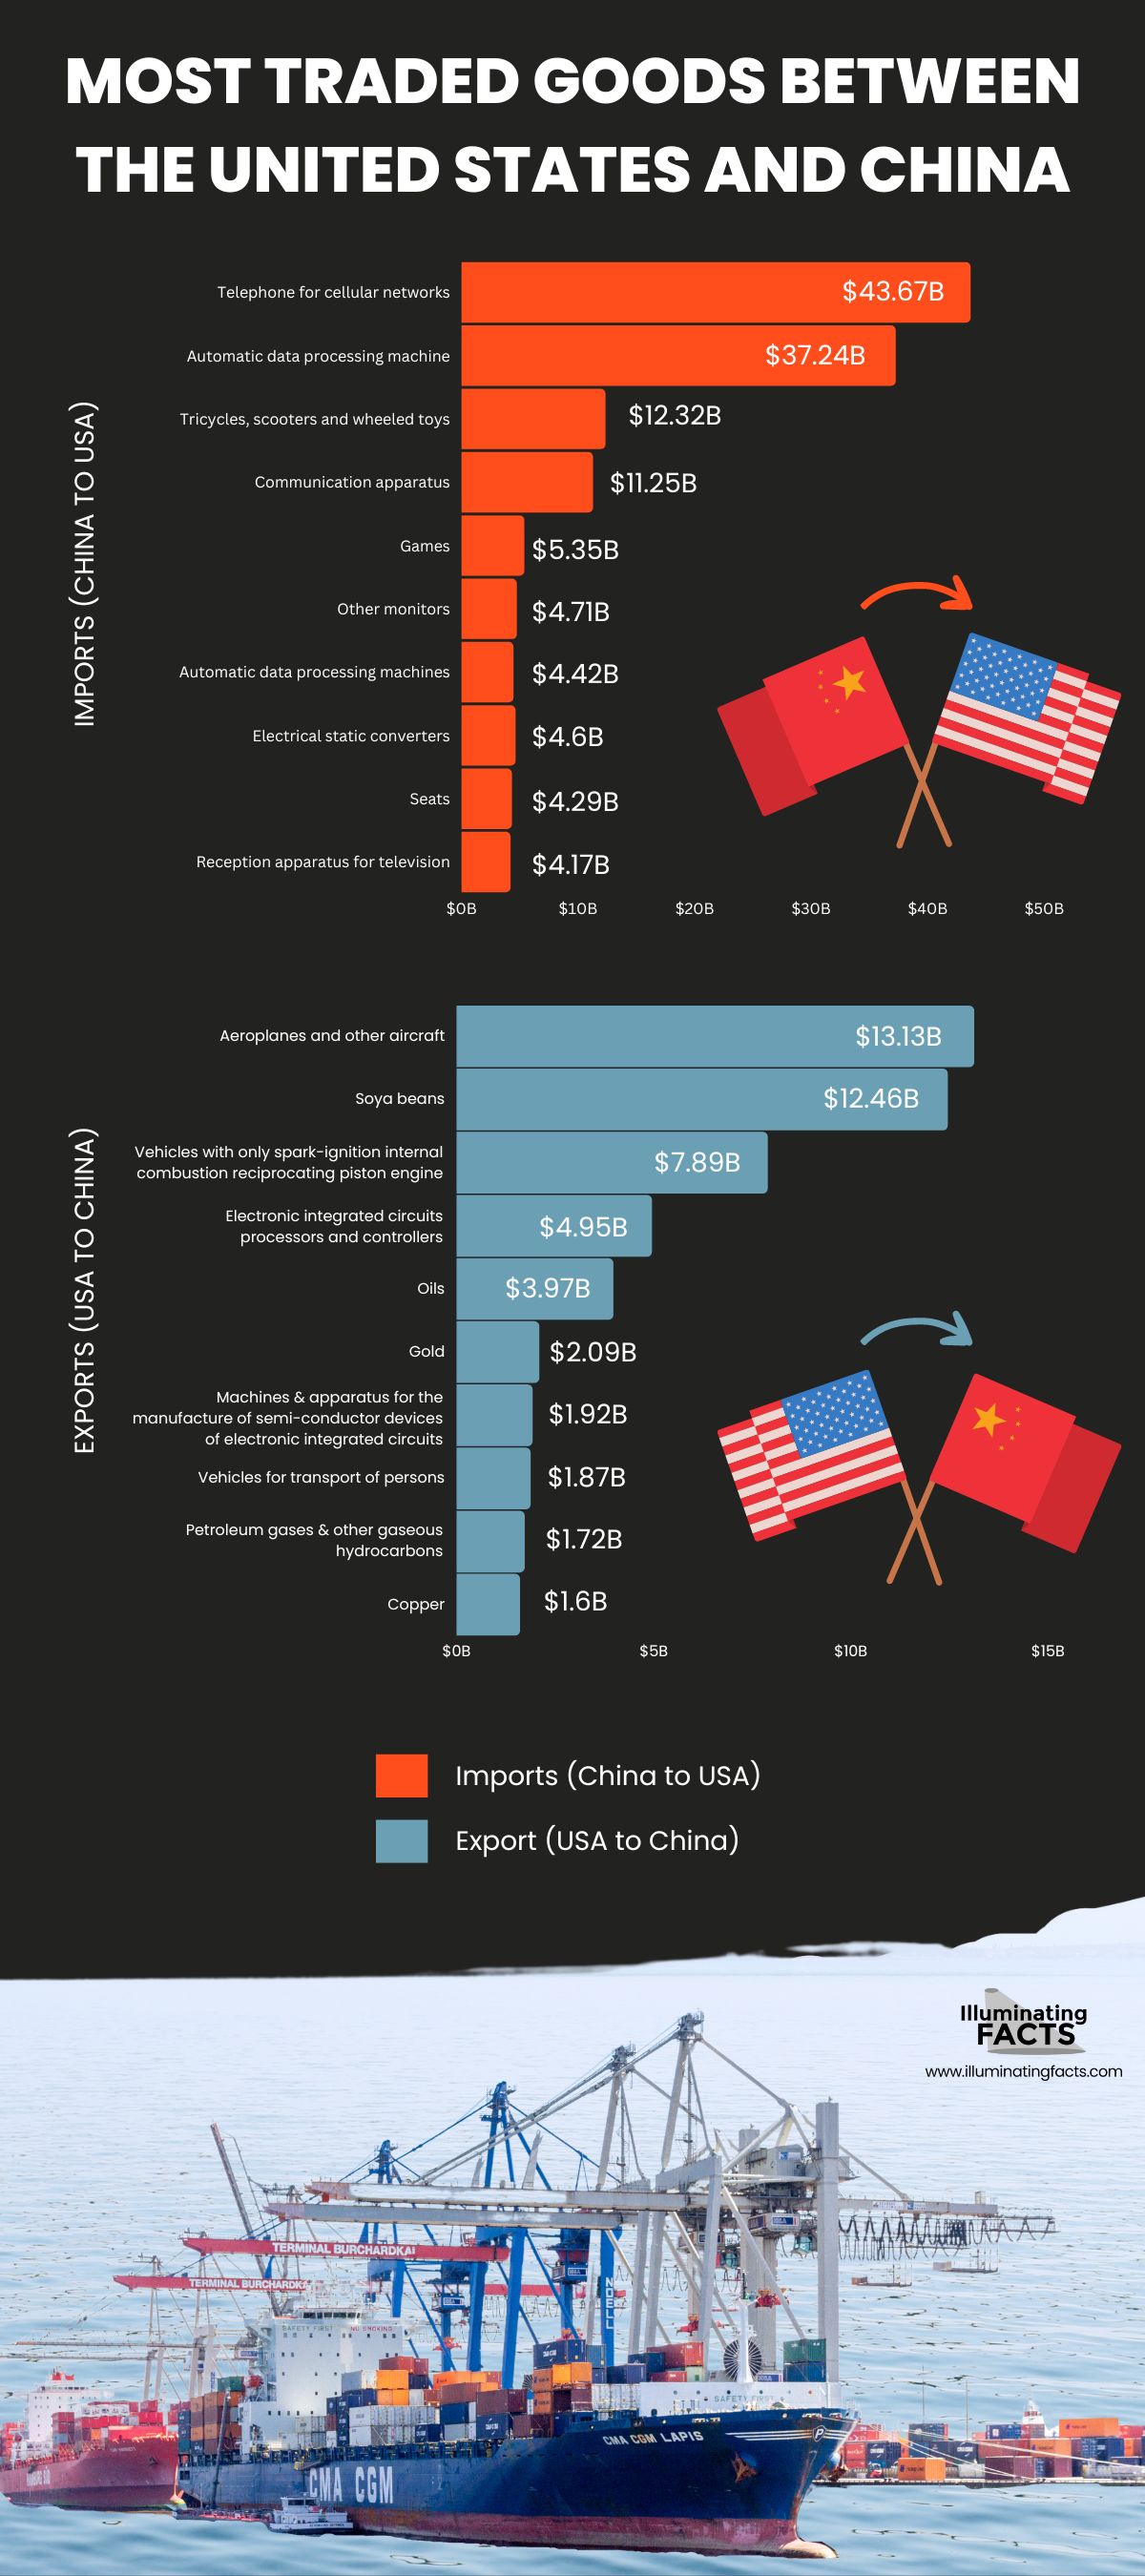 MOST TRADED GOODS BETWEEN THE UNITED STATES AND CHINA